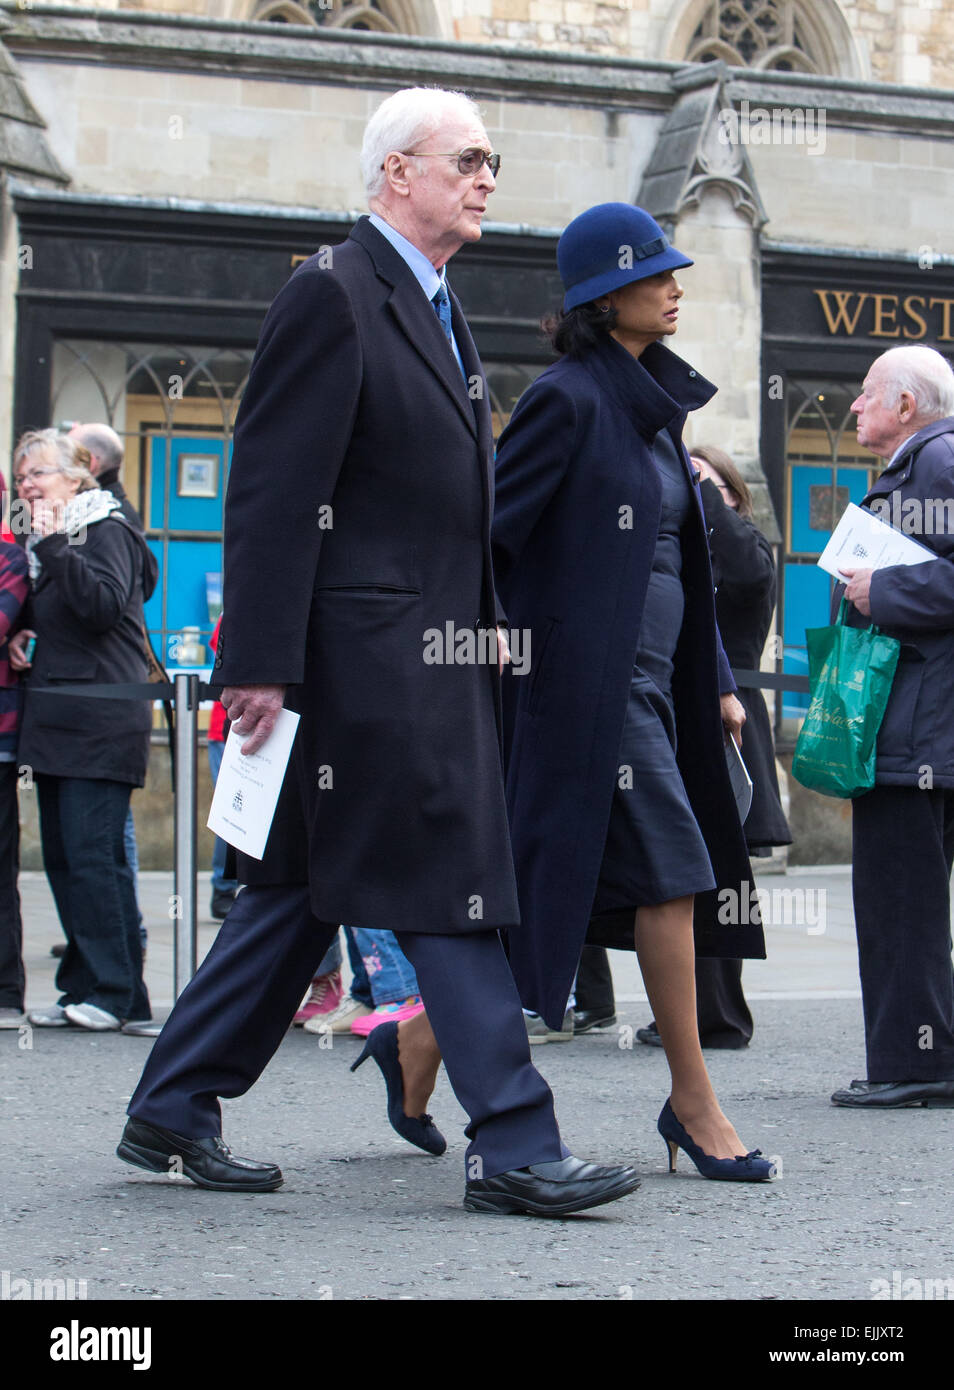 Sir Michael Caine with his wife Shakira Baksh leave Westminster Abbey after the memorial service for Sir Richard Attenborough Stock Photo